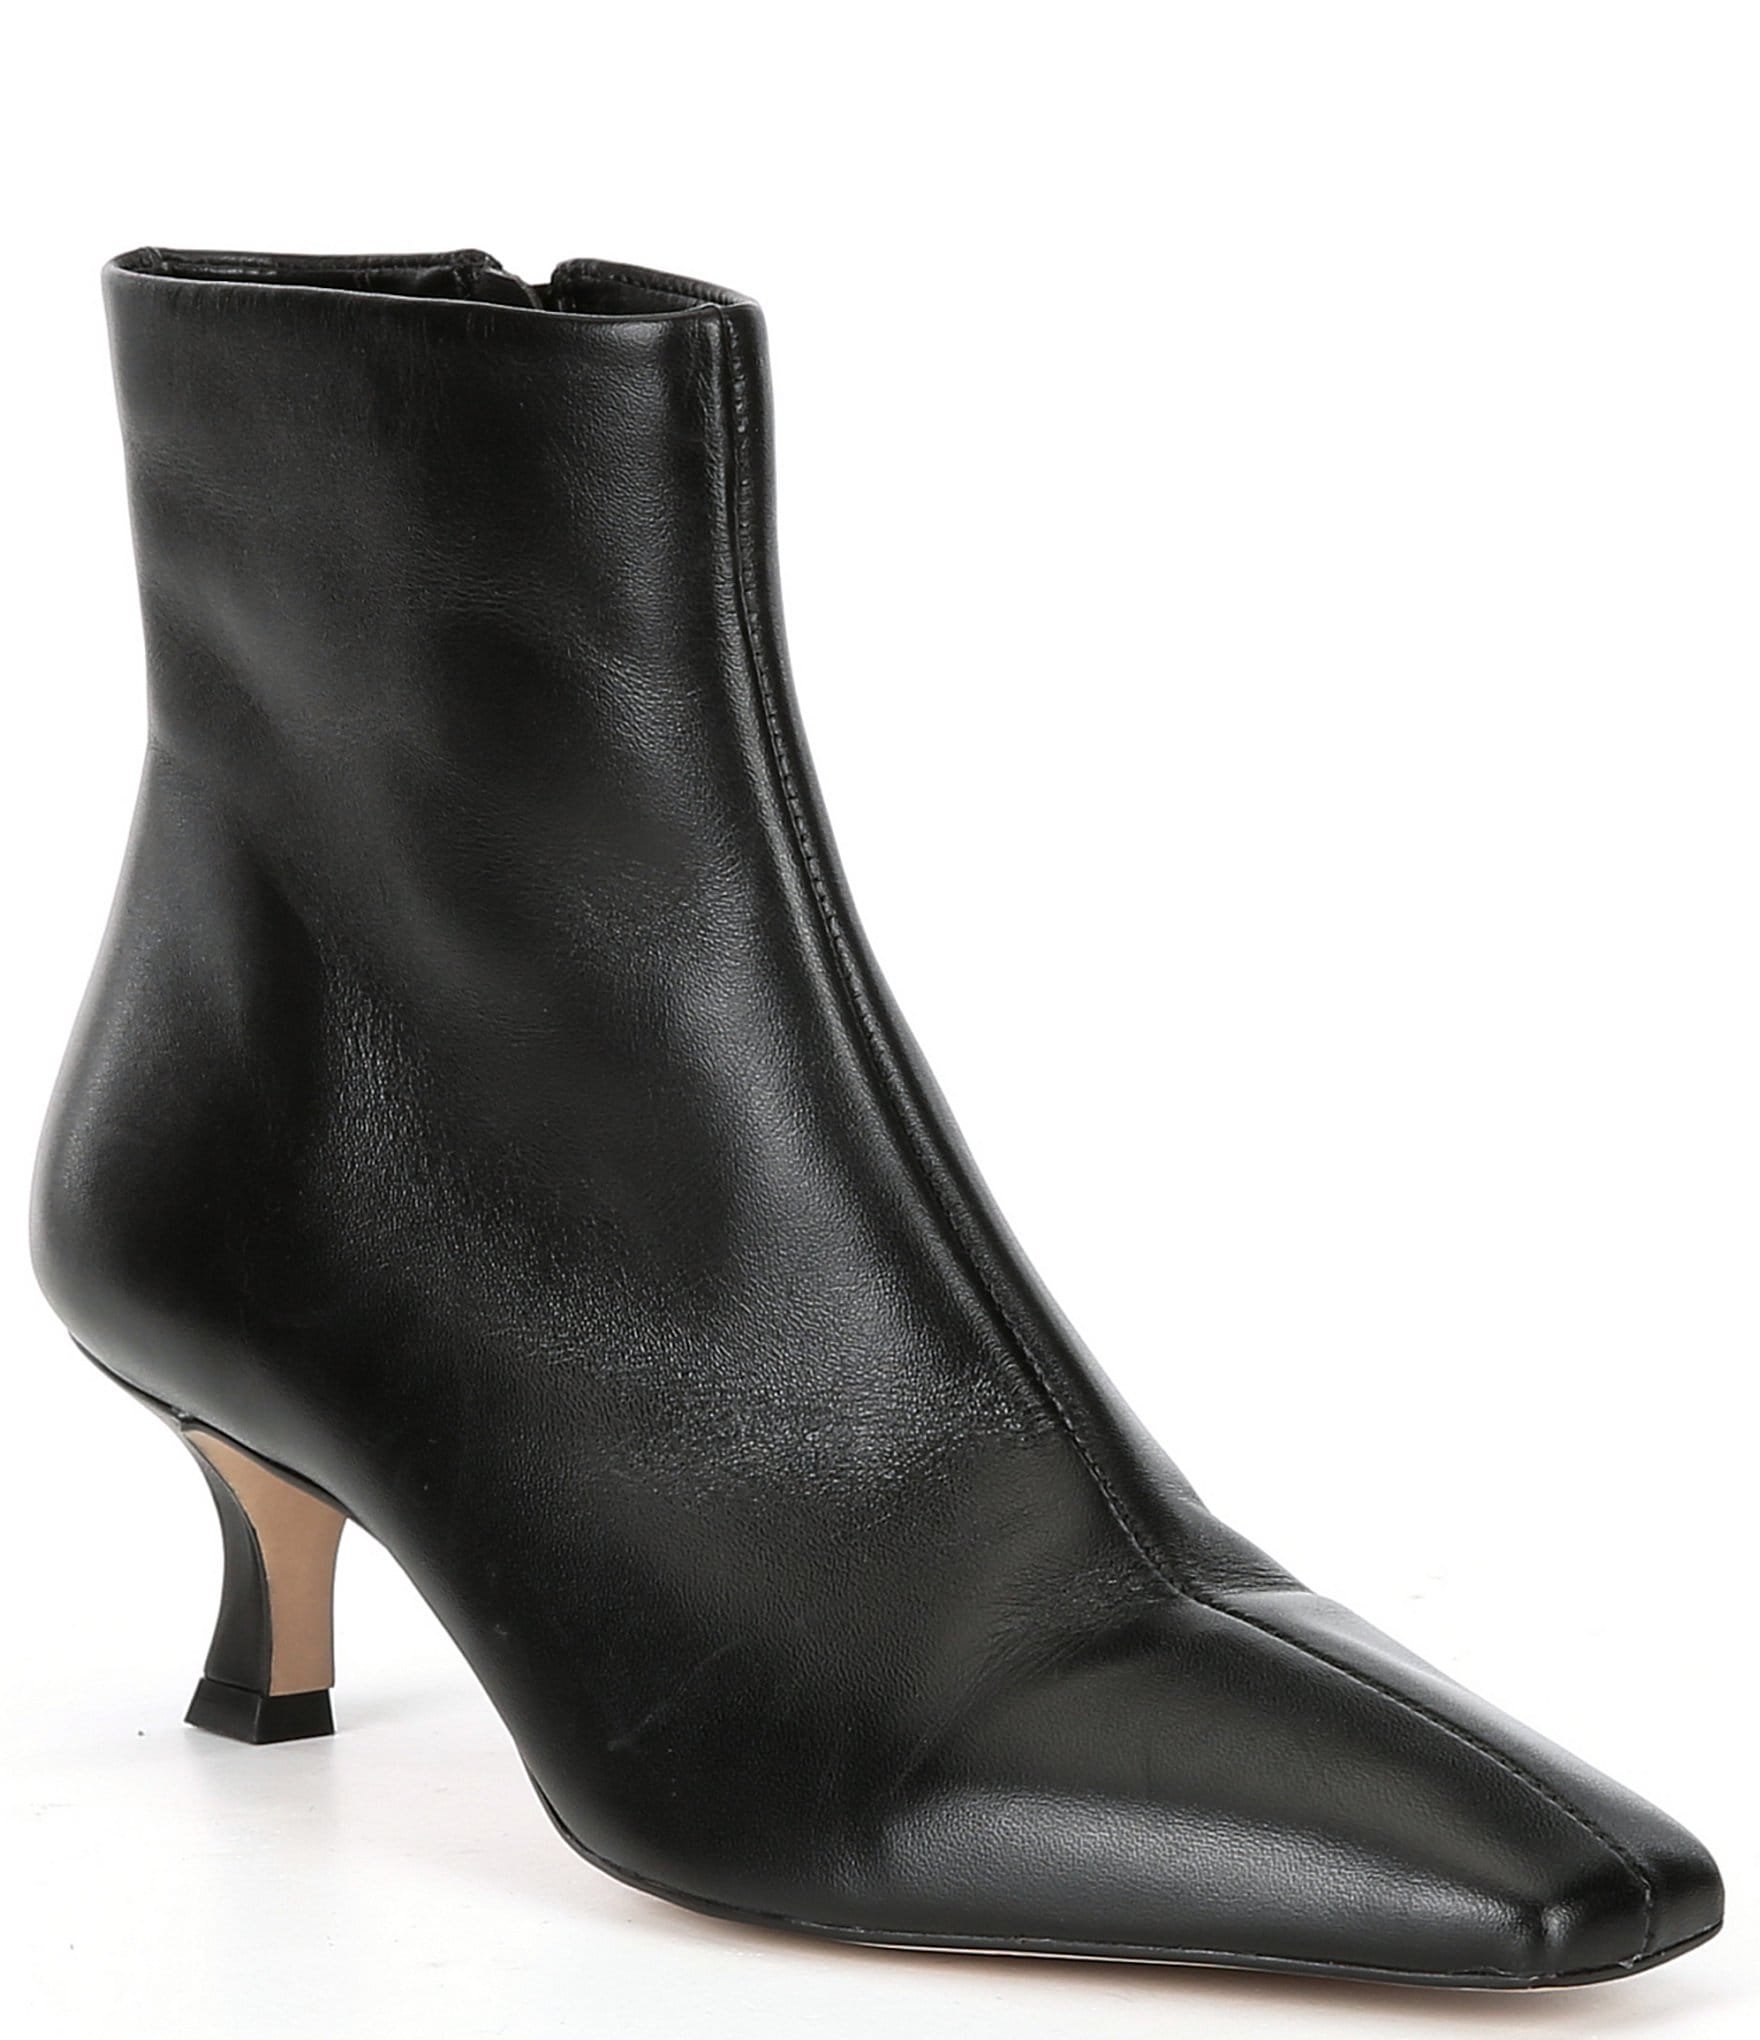 Hollie Mid Heel Leather Boots, Boots | FatFace.com